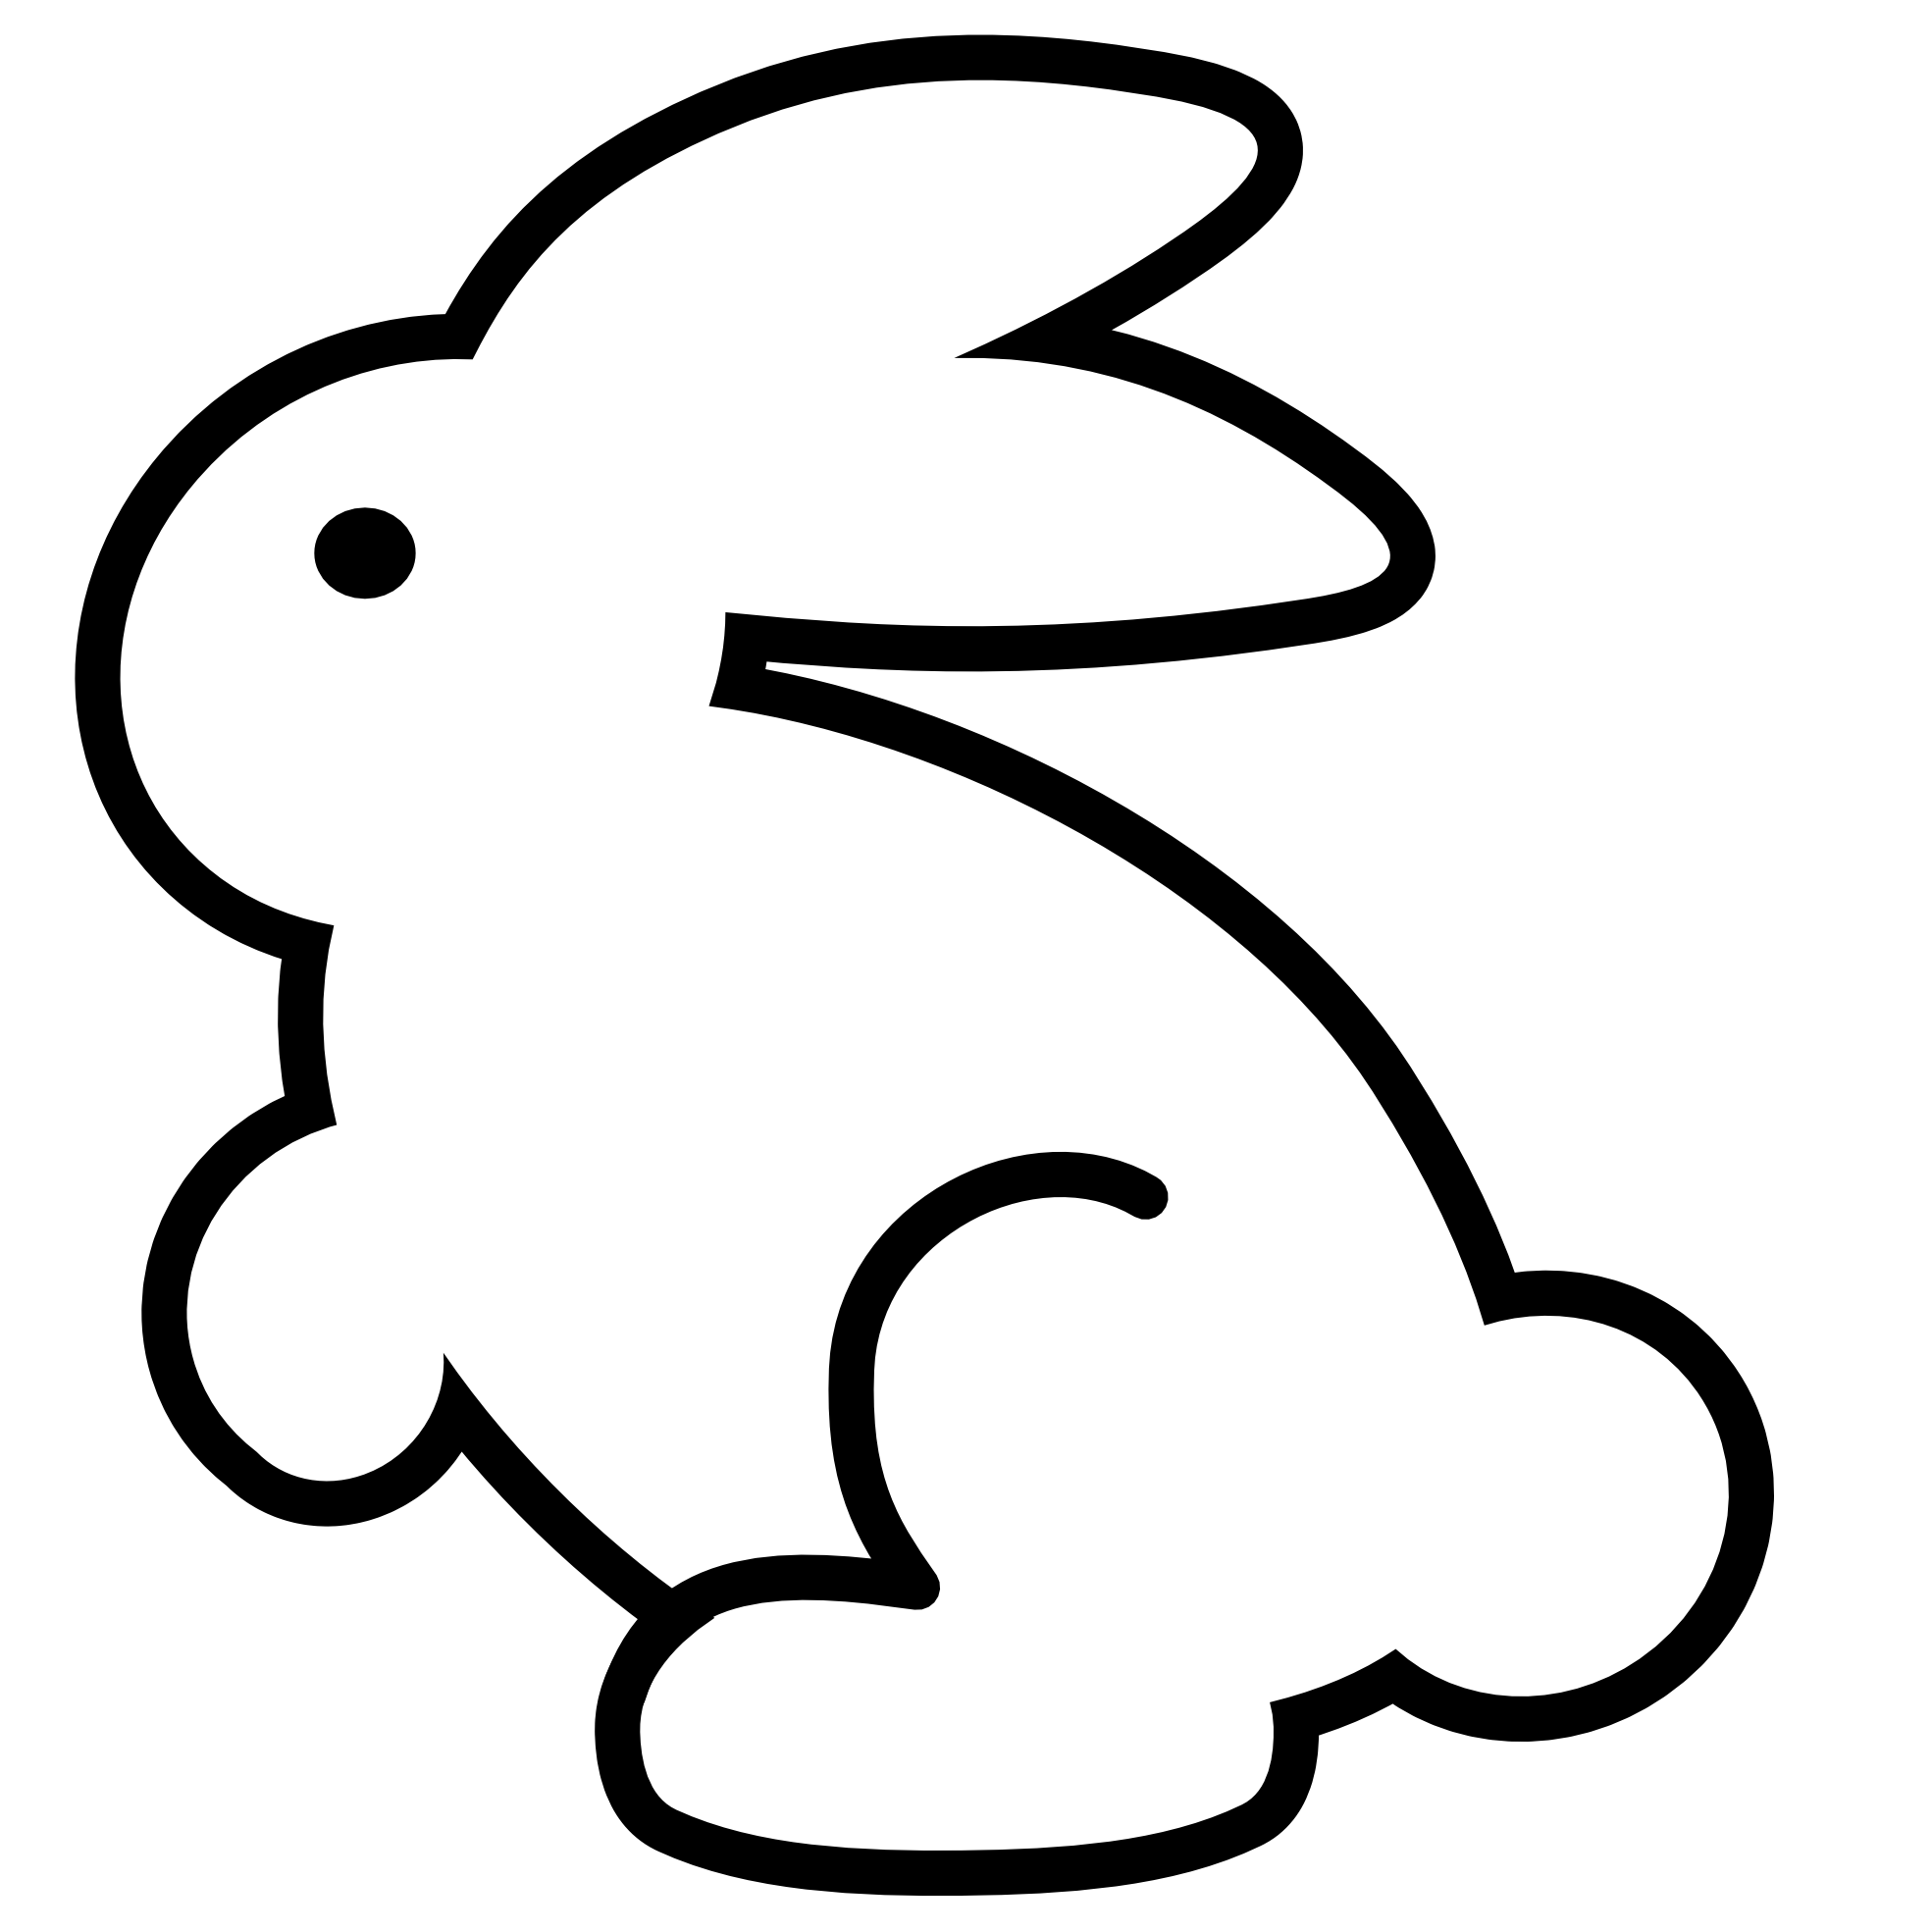 Bunny black and white. Clipart easter rustic